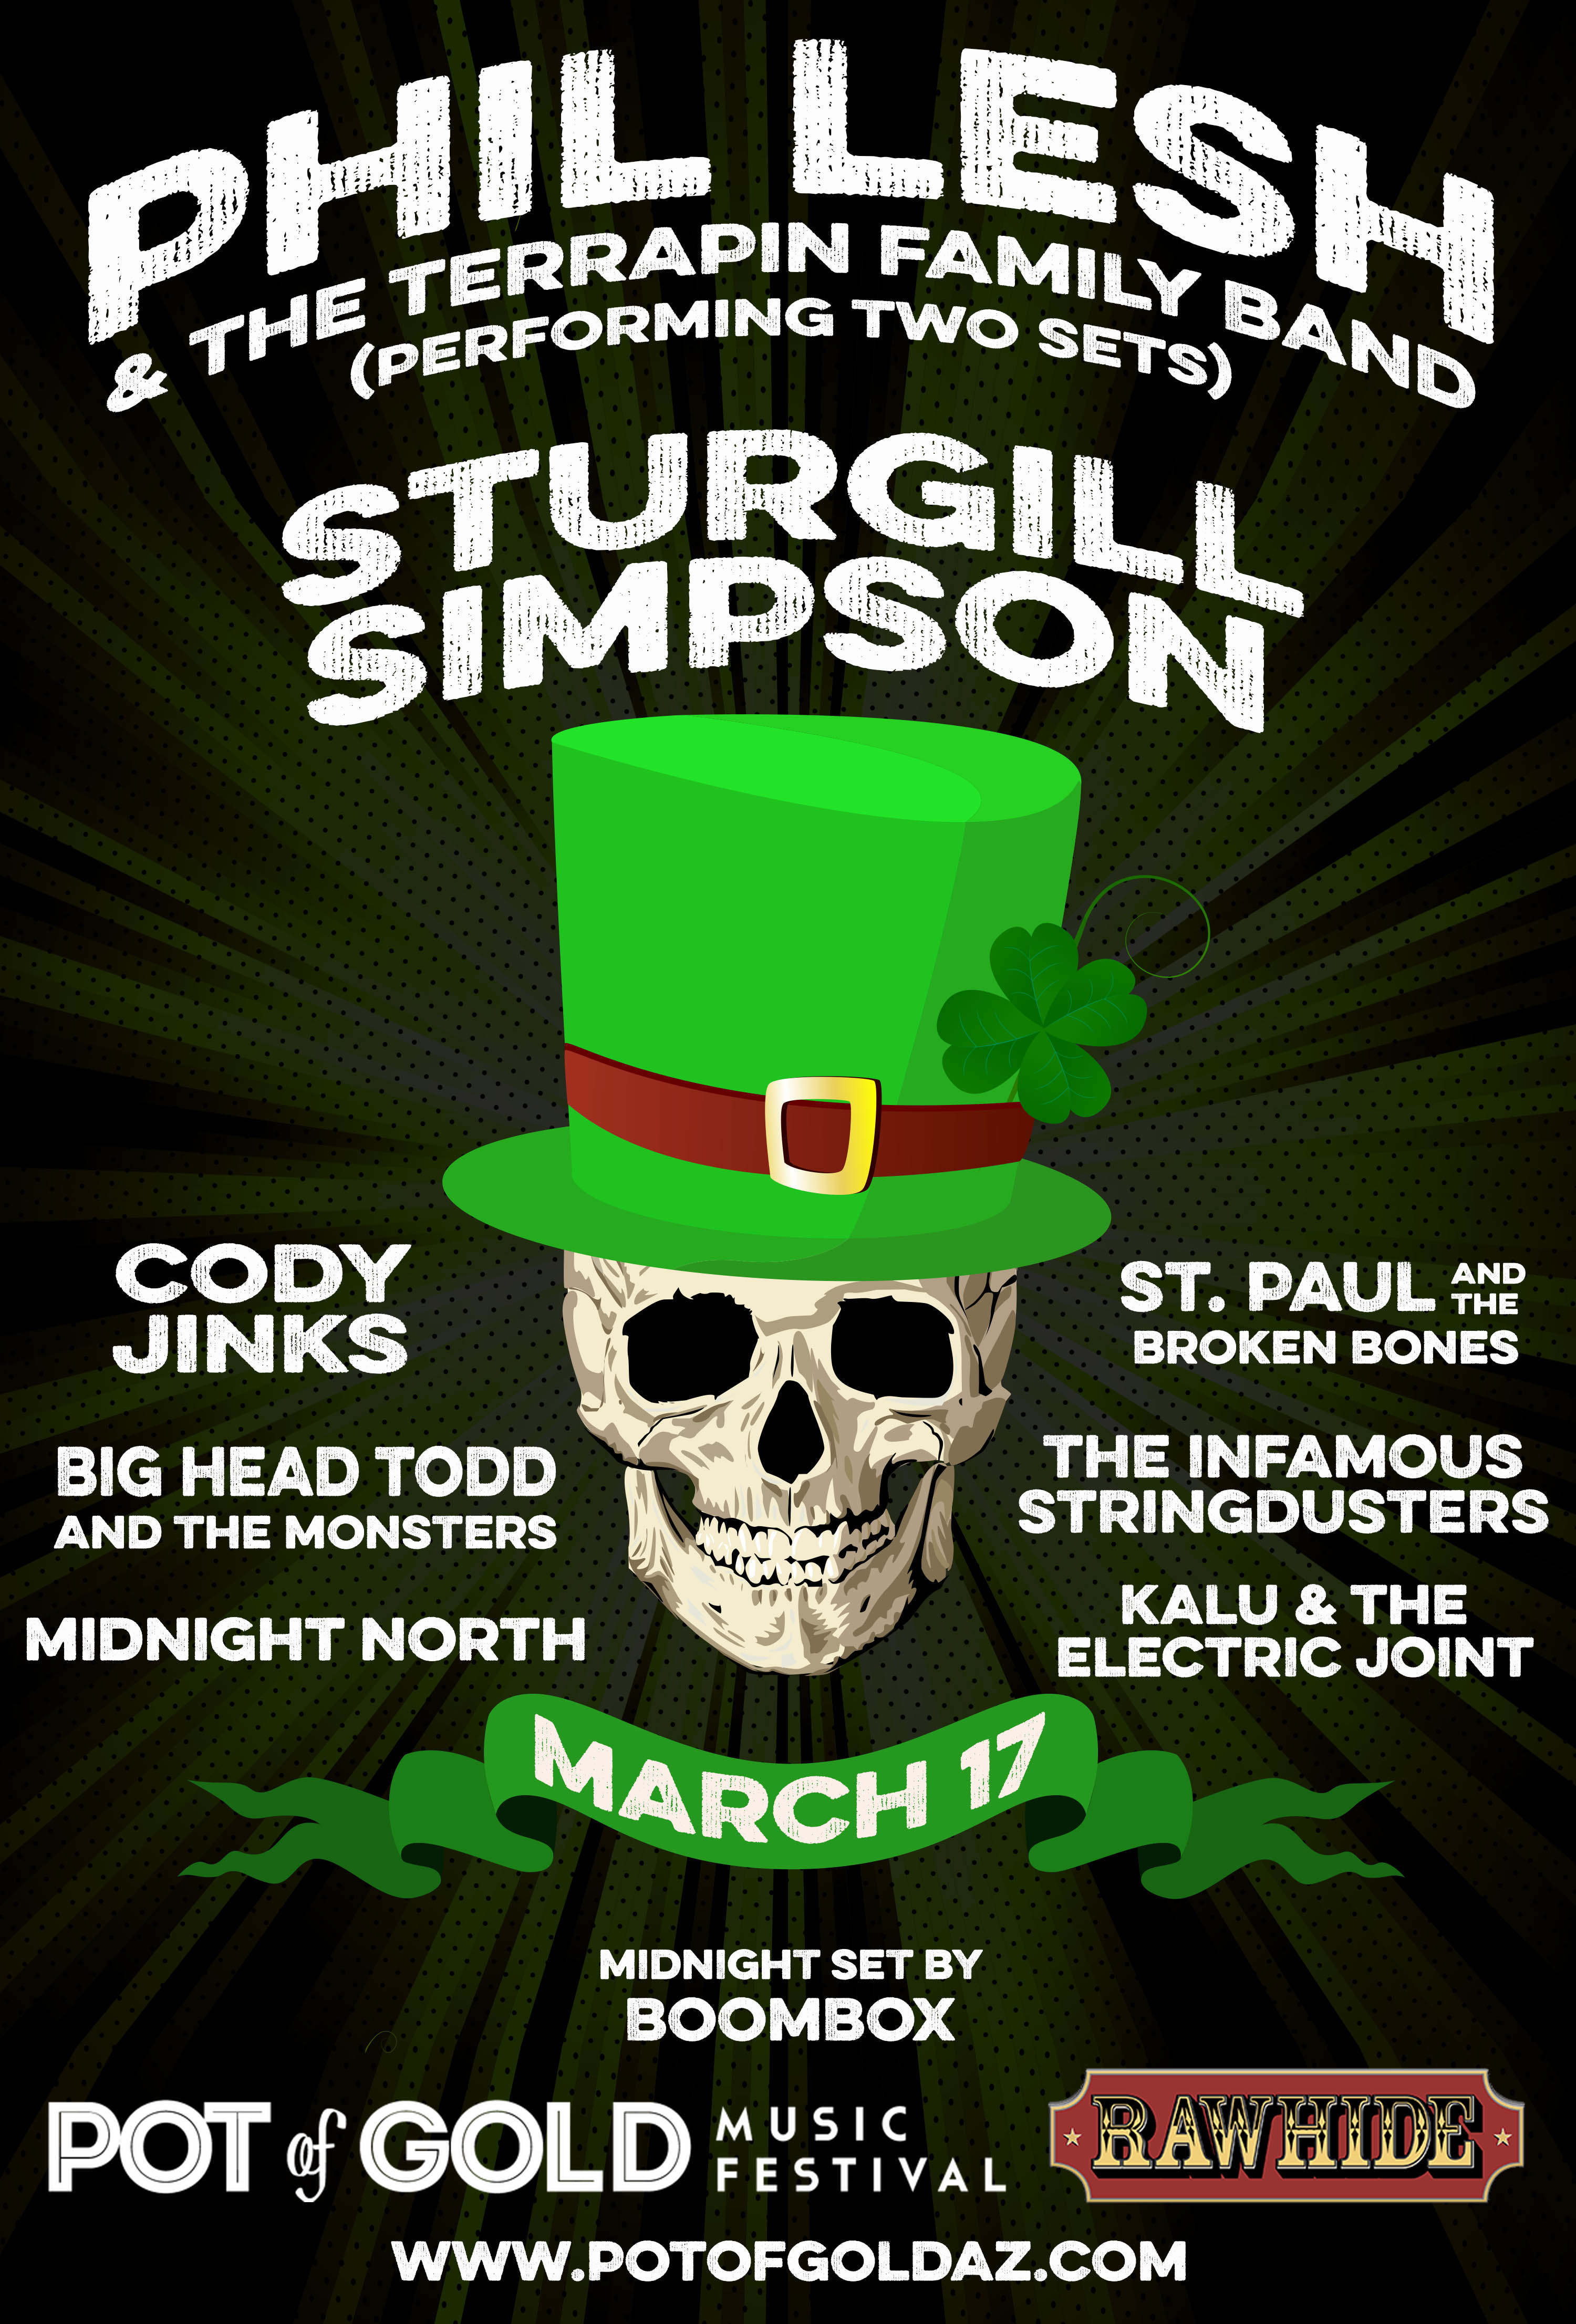 Big Head Todd is celebrating St. Patricks day with Phil Lesh, Sturgill Simpson, and more at Pot of Gold Music Festival in Chandler, AZ! 